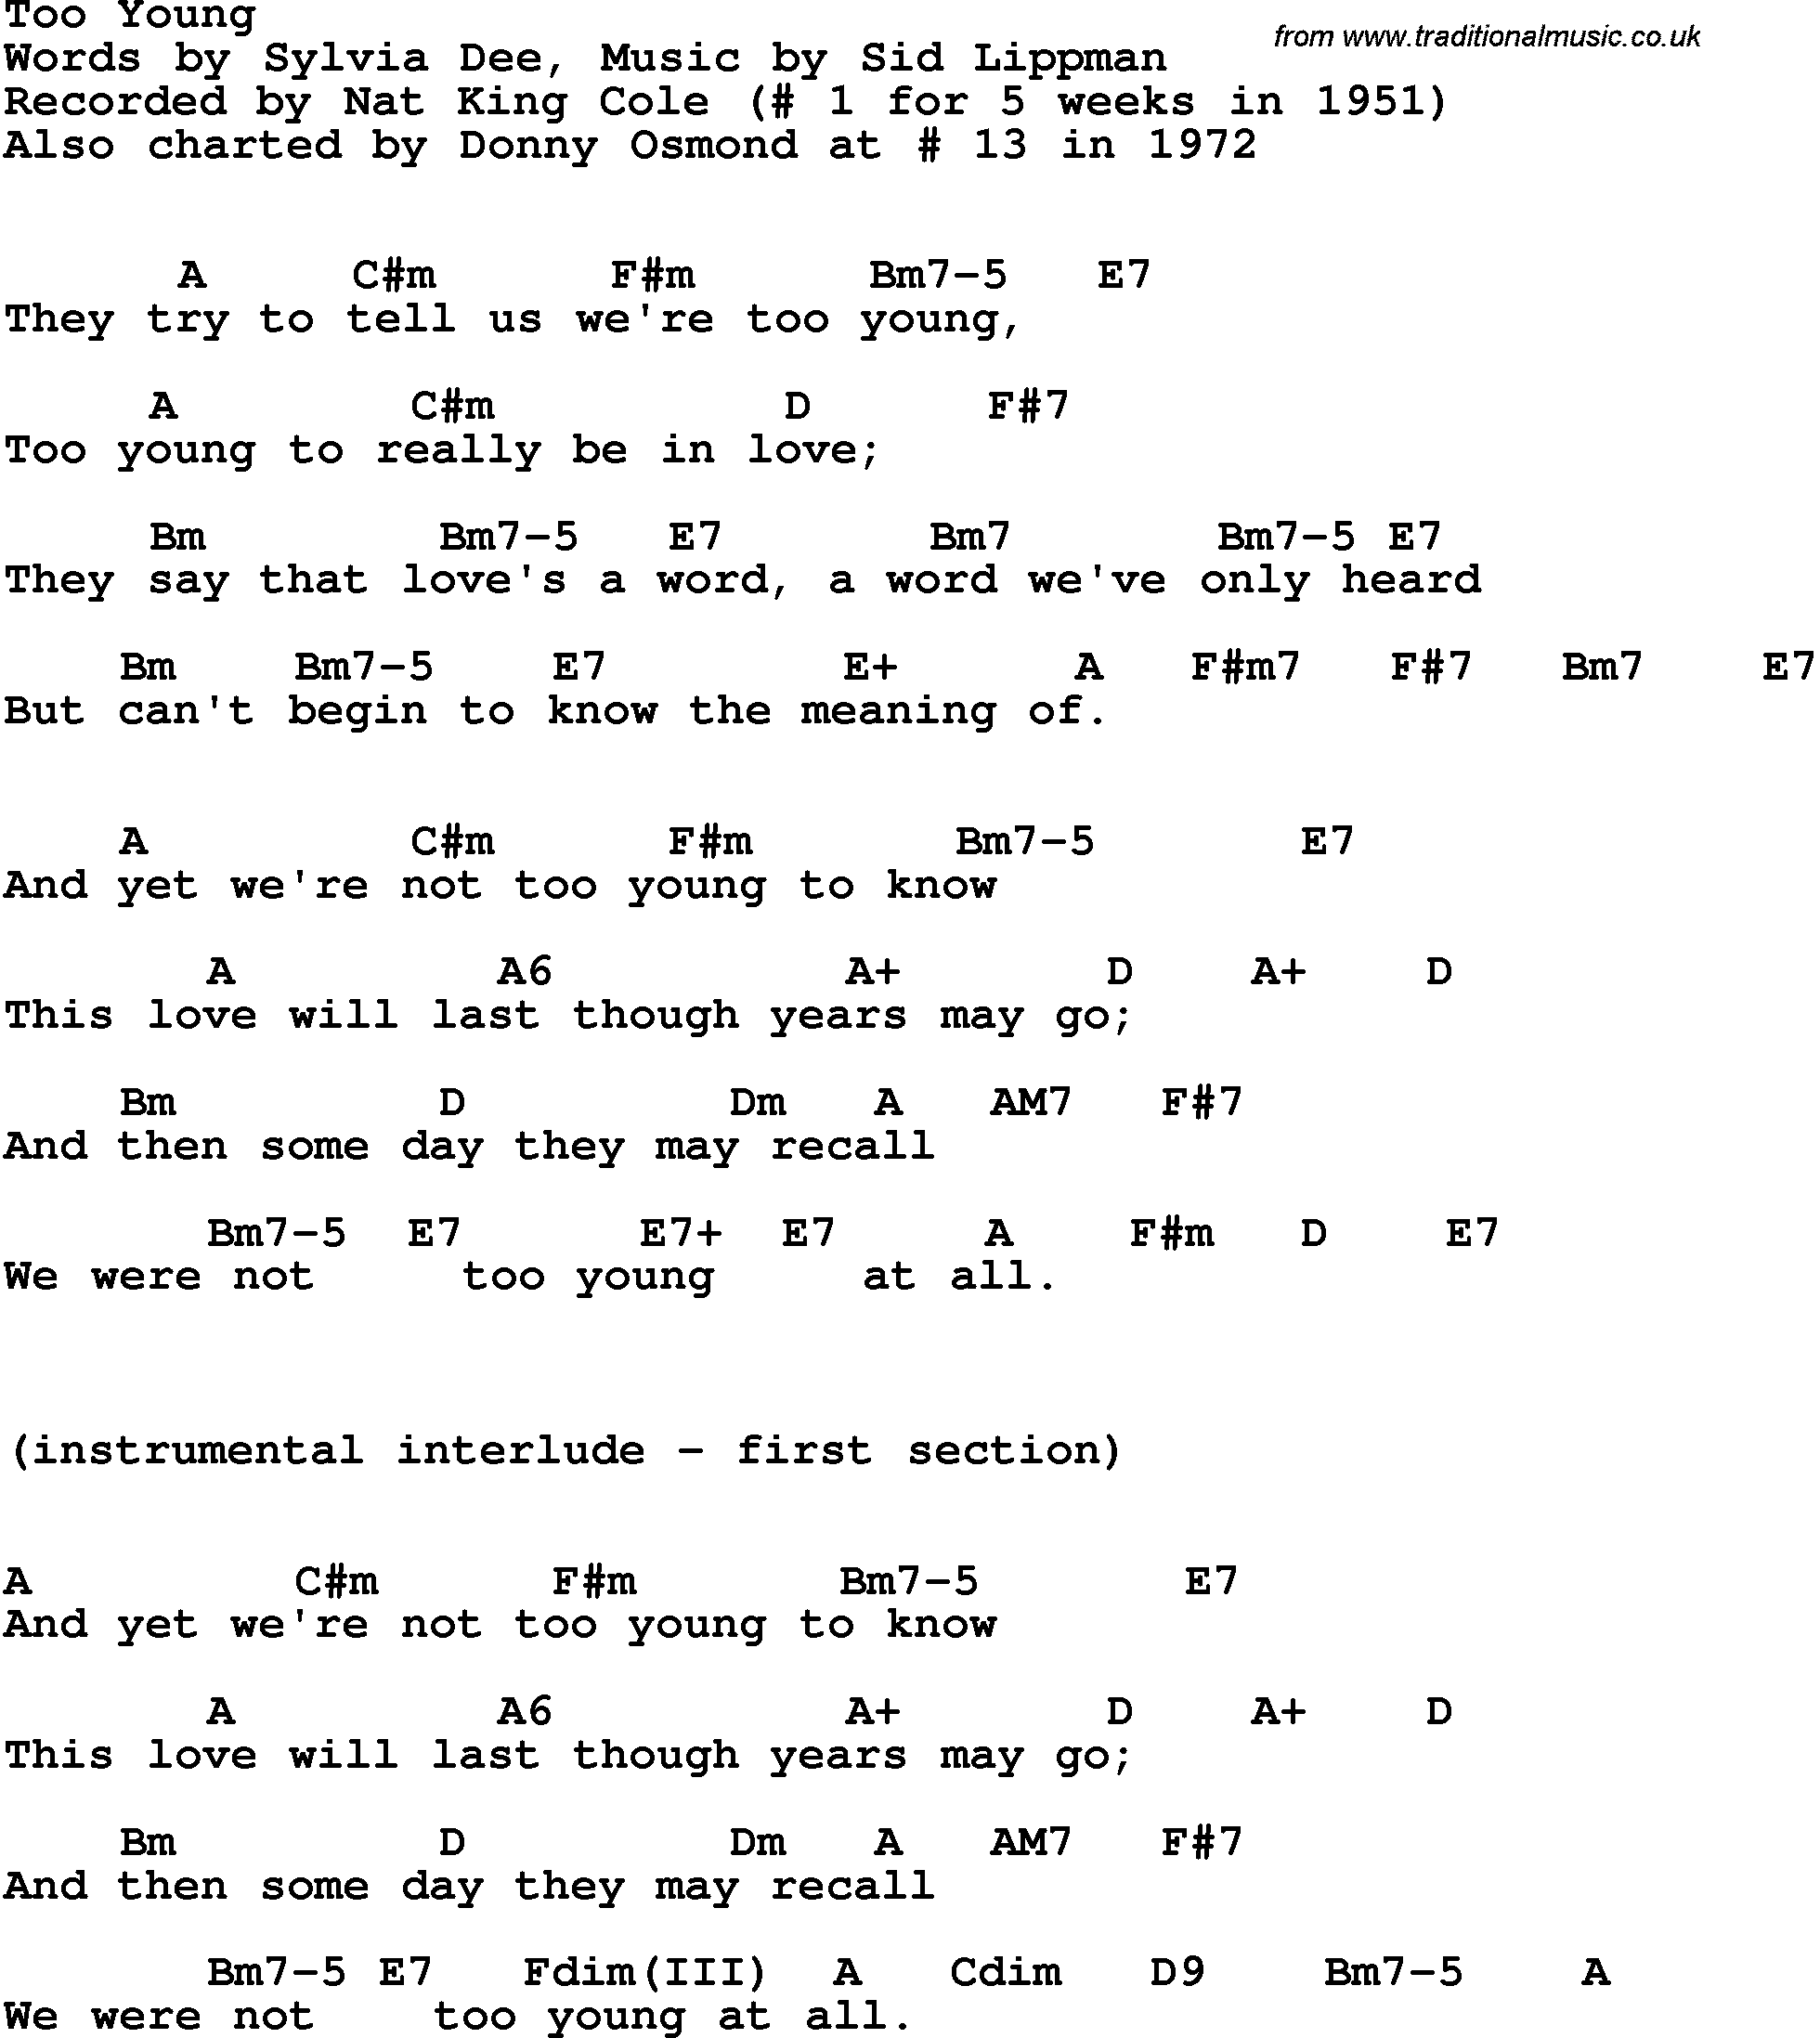 Song lyrics with guitar chords for Too Young - Nat King Cole, 1951